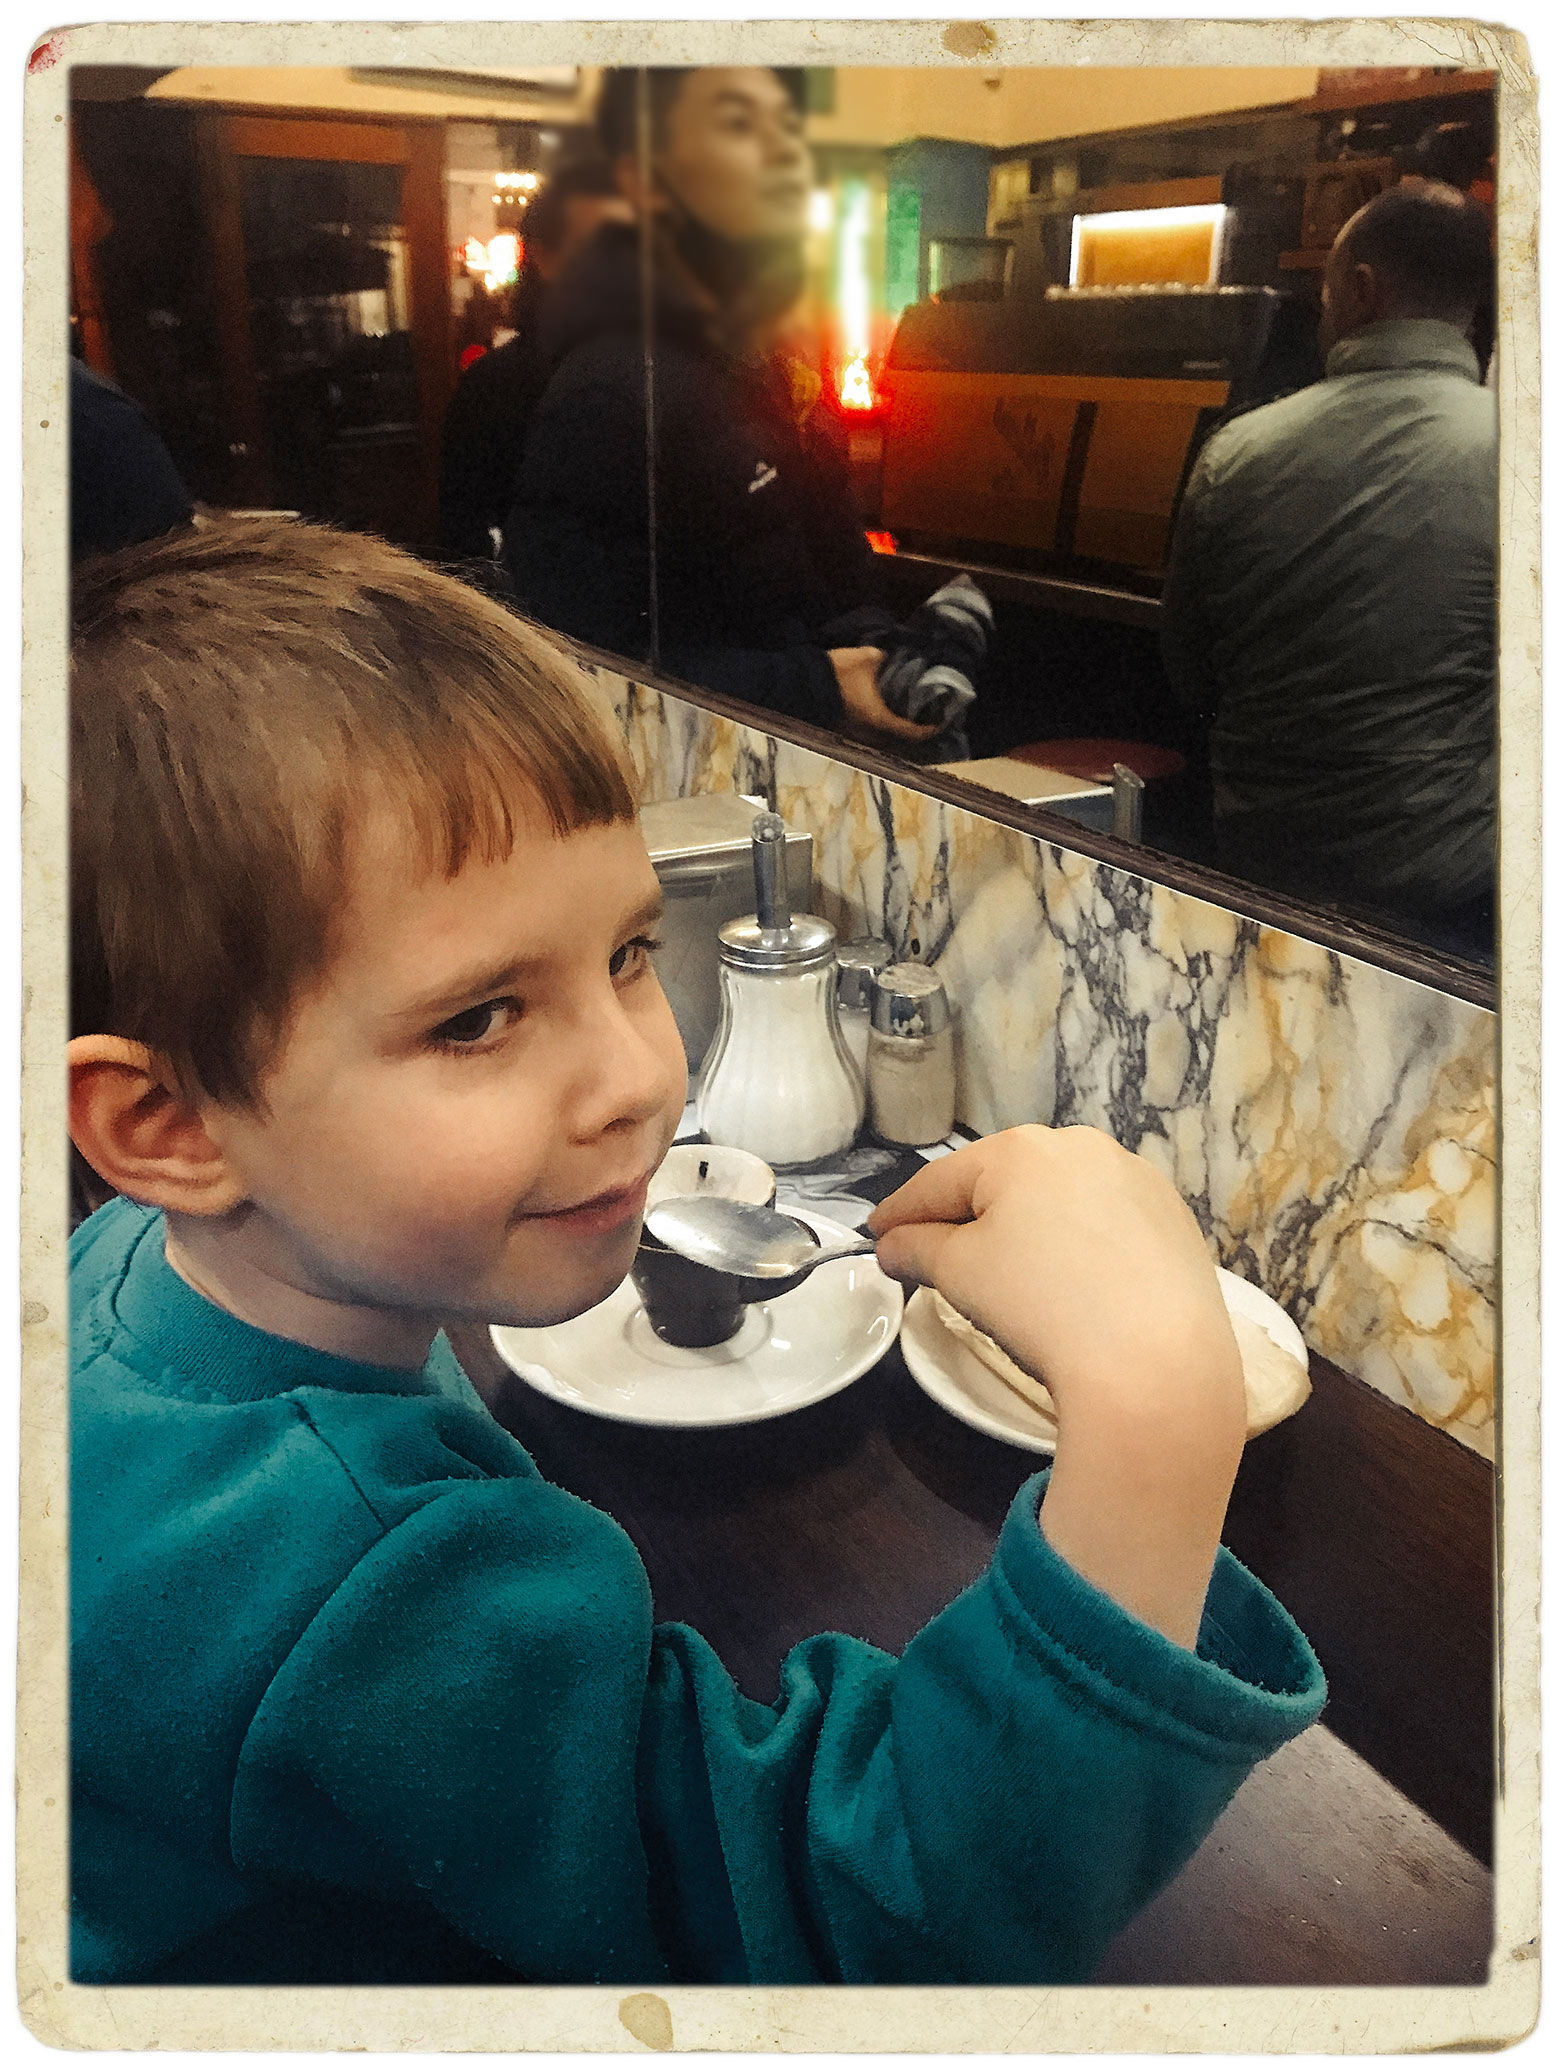 Elisey Durrant's first proud and pleasing trip to Pellegrini's Espresso Bar 